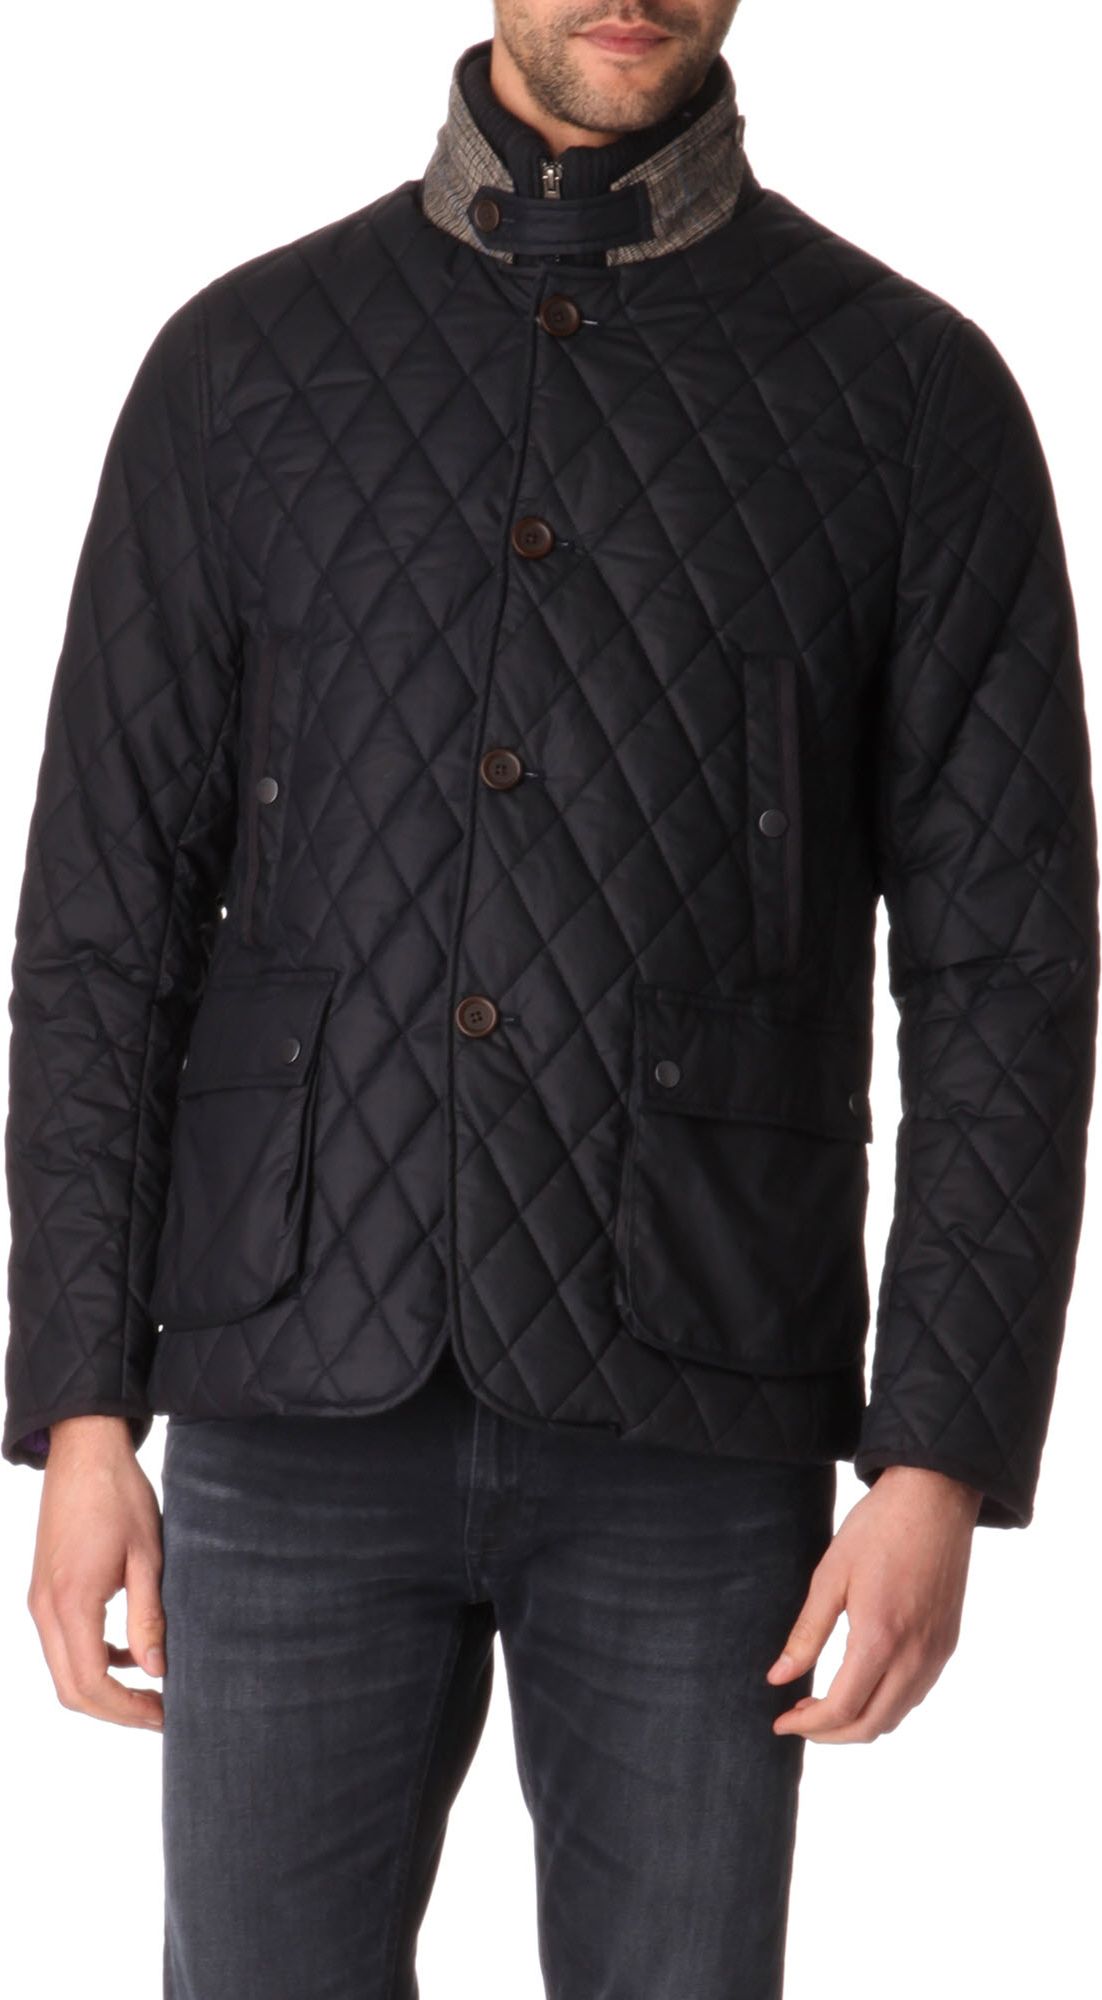 Ted Baker Quilted Jacket in Navy (Black) for Men - Lyst